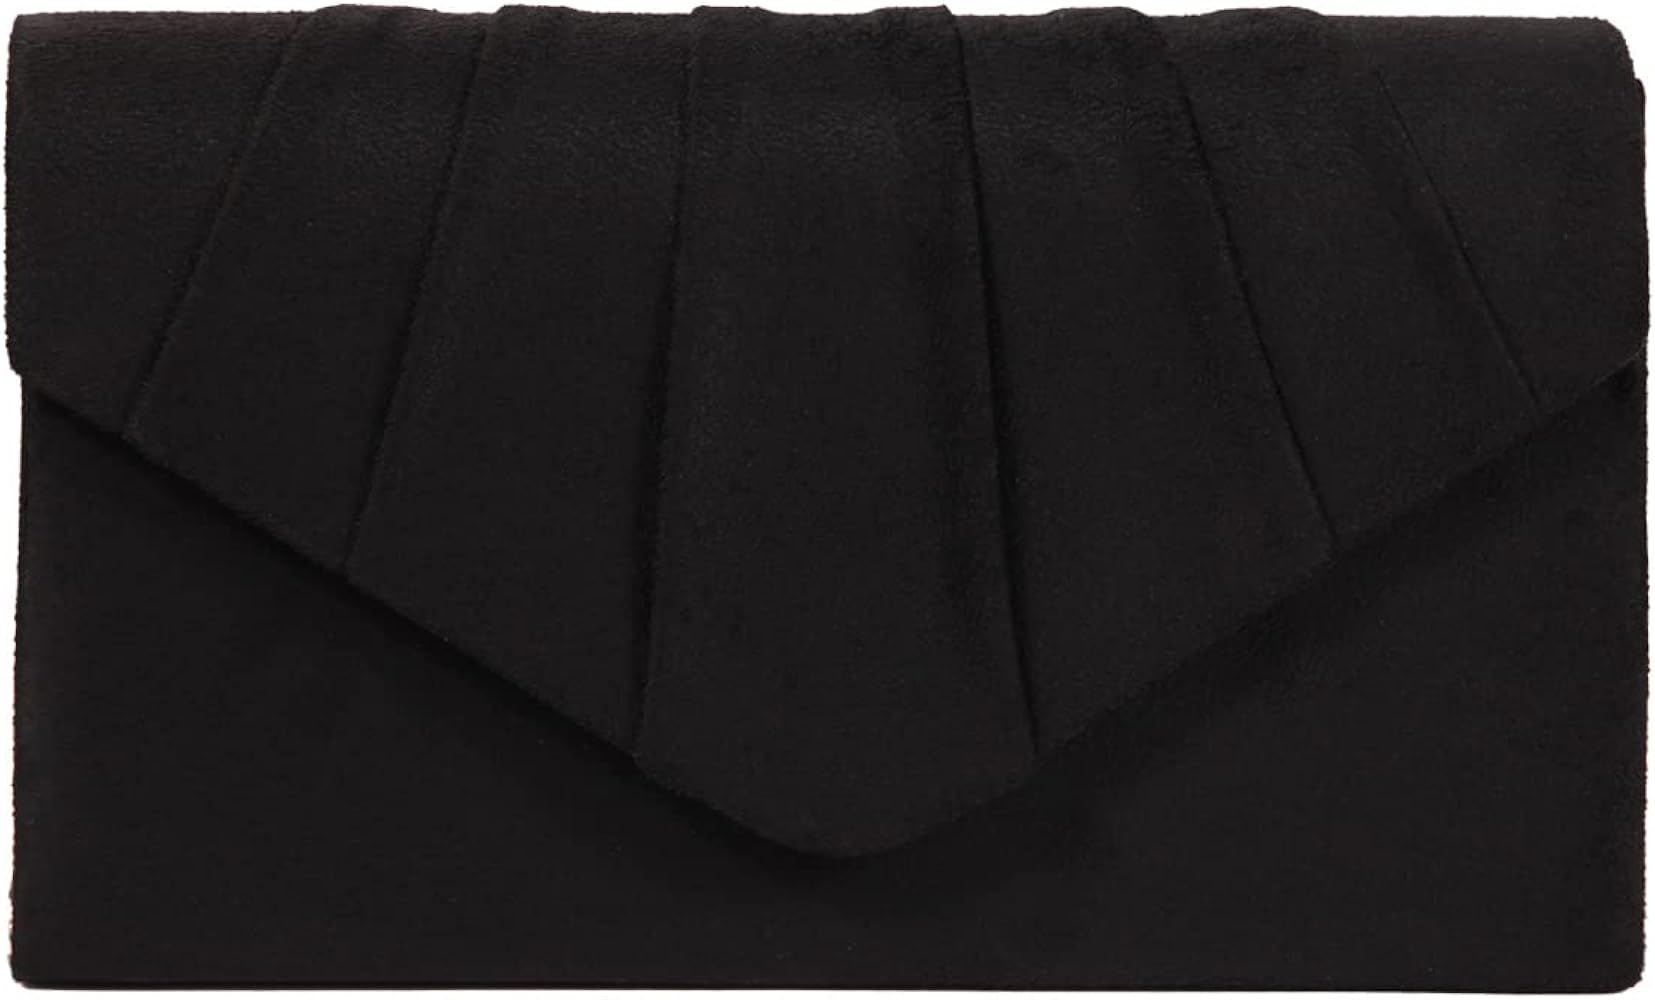 Clutch Purses for Women Evening Clutch Bag Women's Evening Bag with Detachable Chain for Wedding ... | Amazon (US)